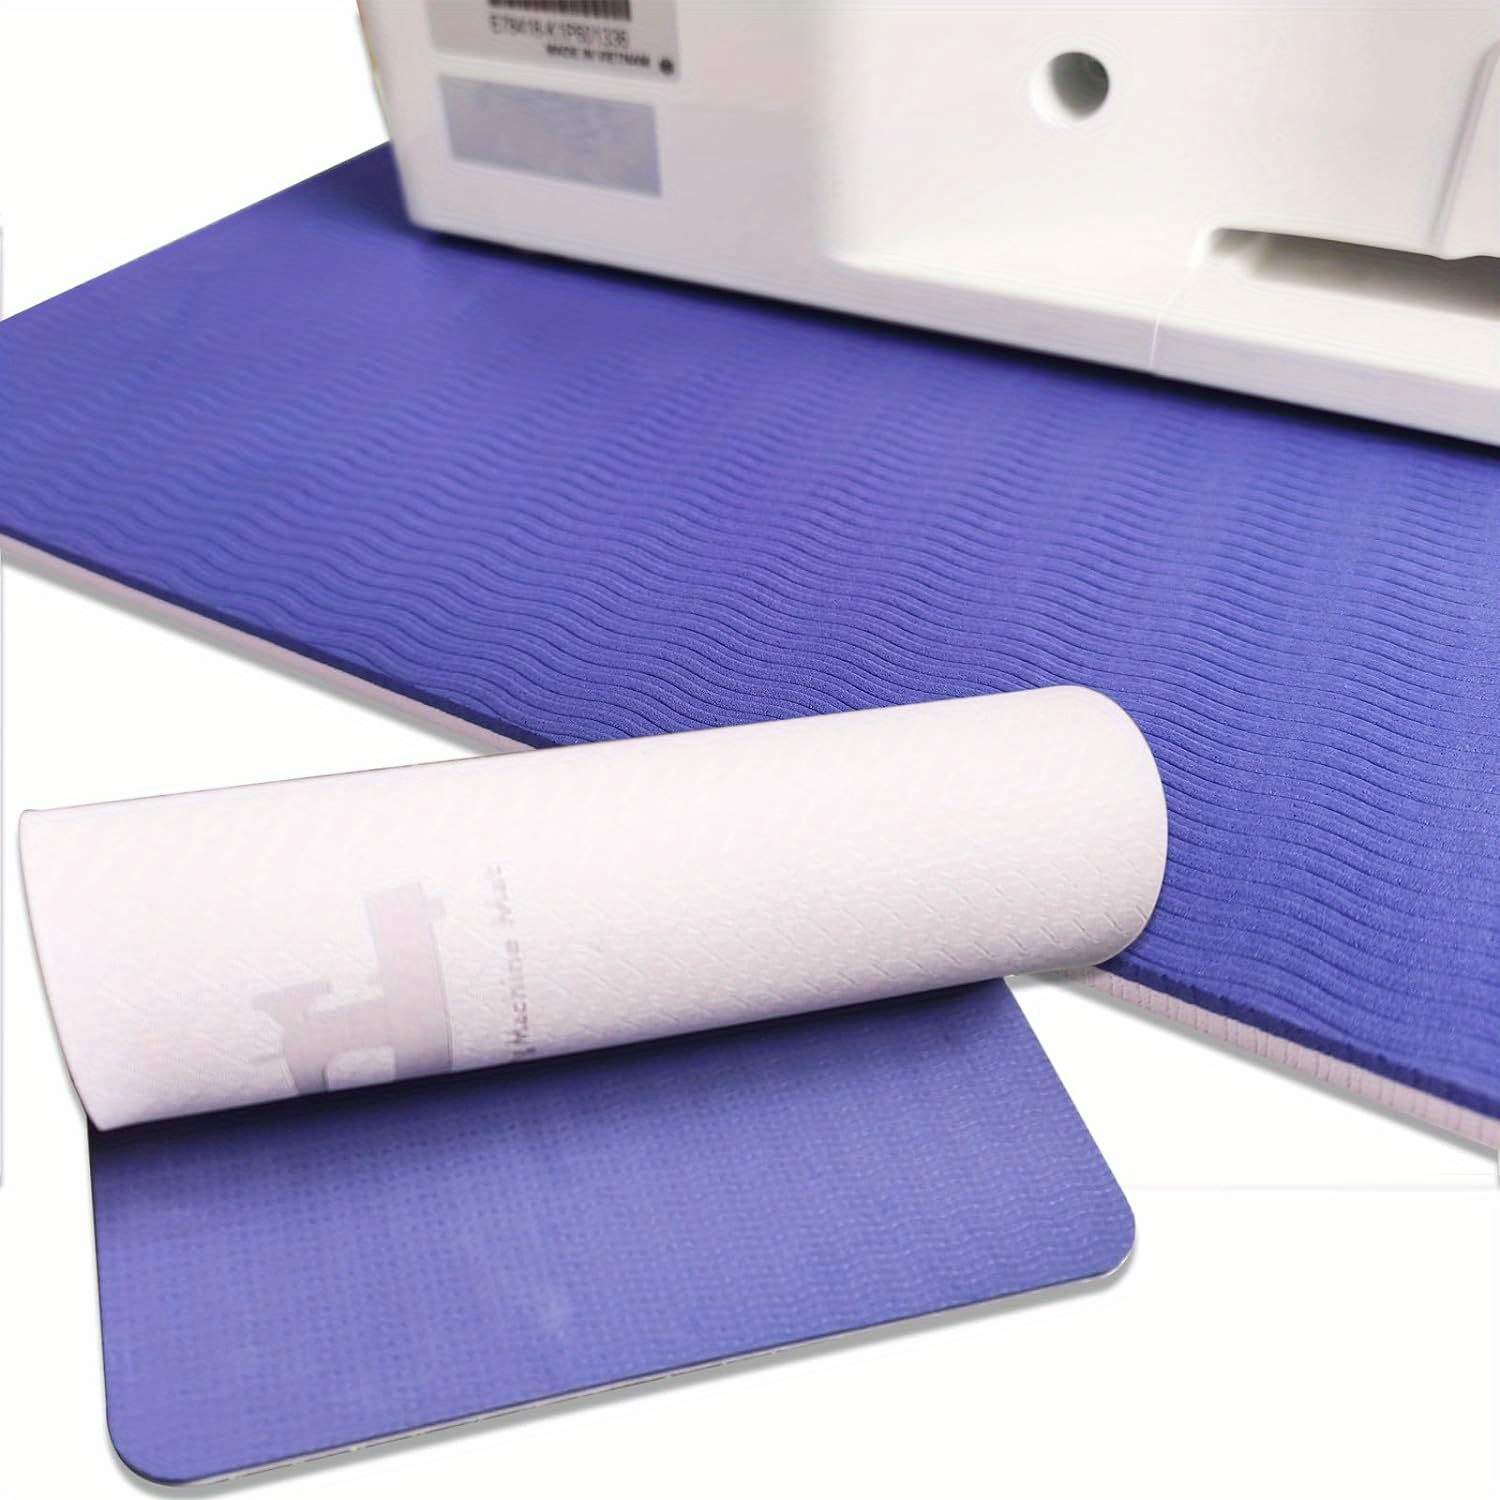 

Dual-sided Shock Absorbing Cushion For Sewing Machines - Vibration Reducing, No Power Needed, Available In Pink Or Blue